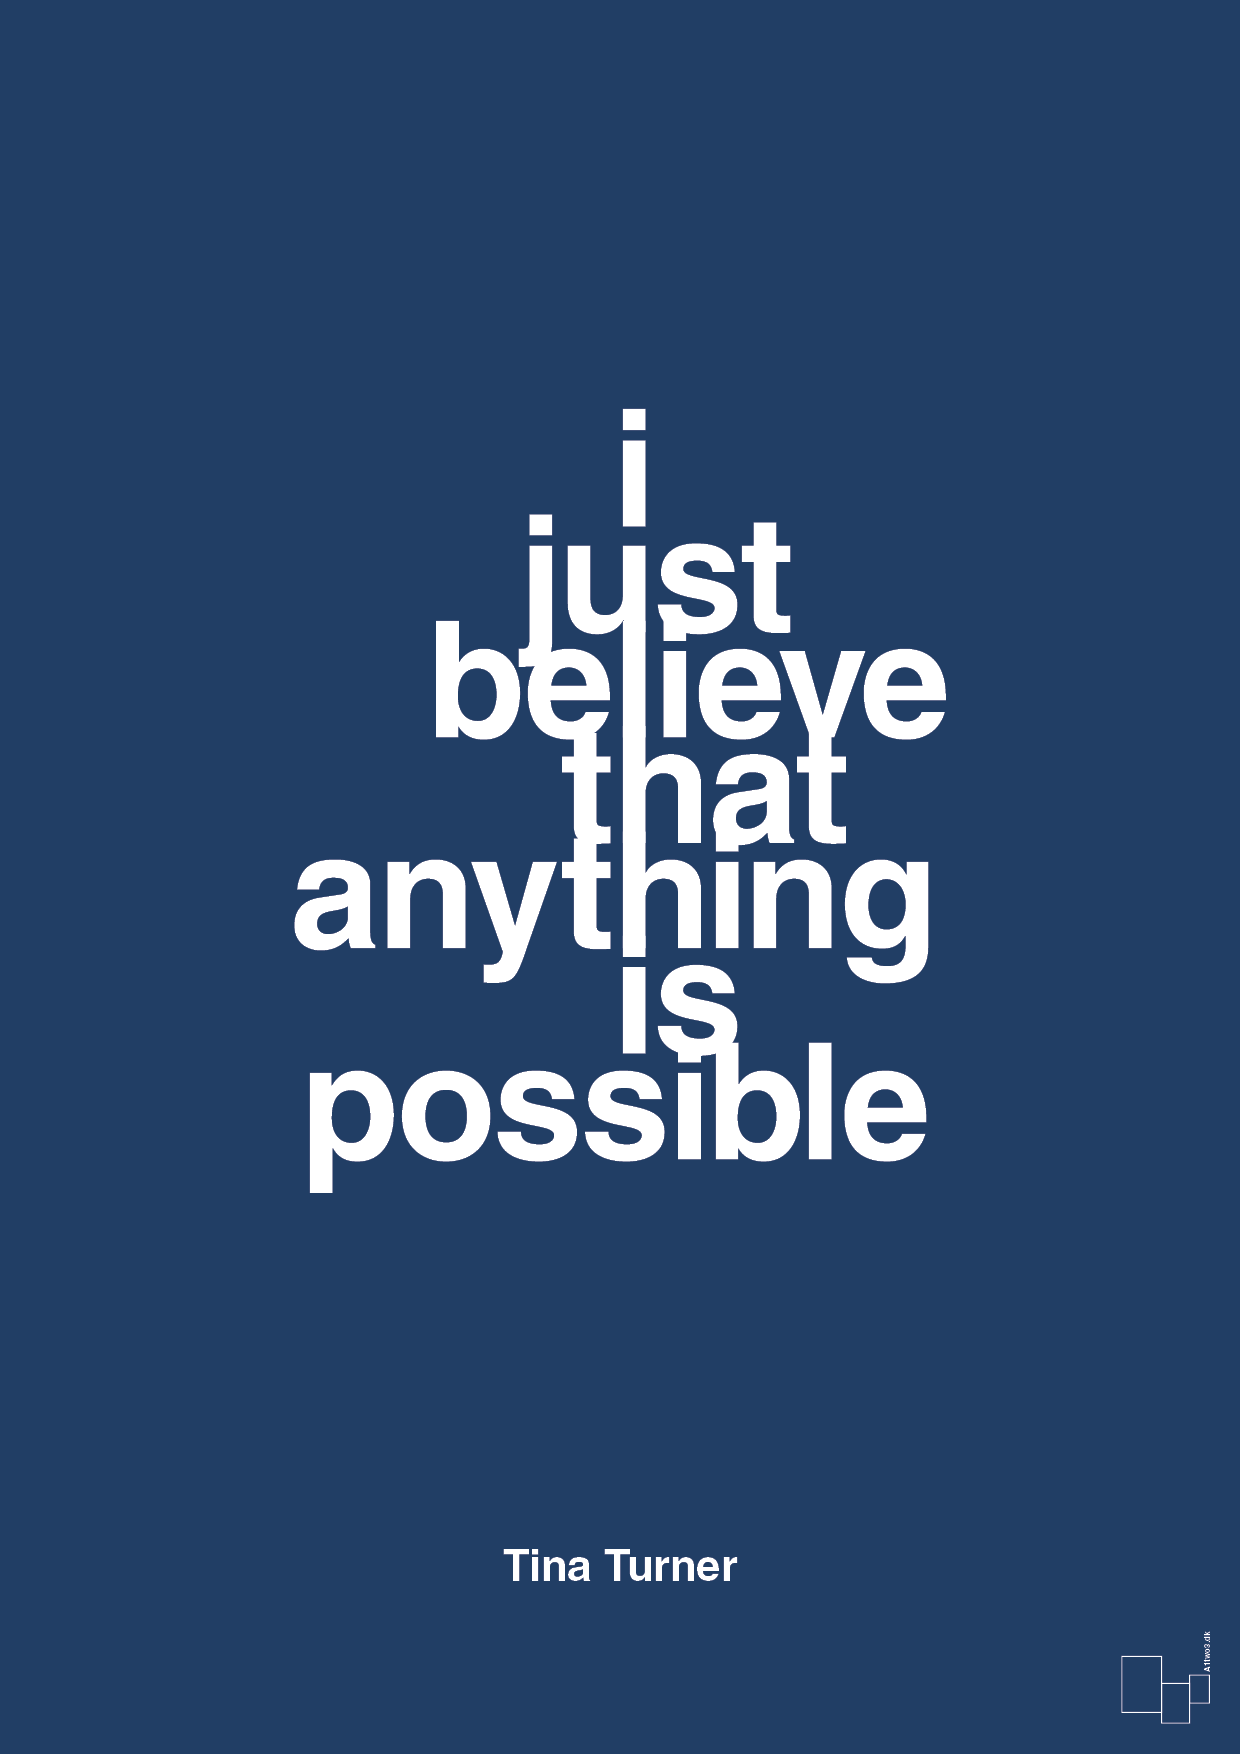 i just believe that anything is possible - Plakat med Citater i Lapis Blue